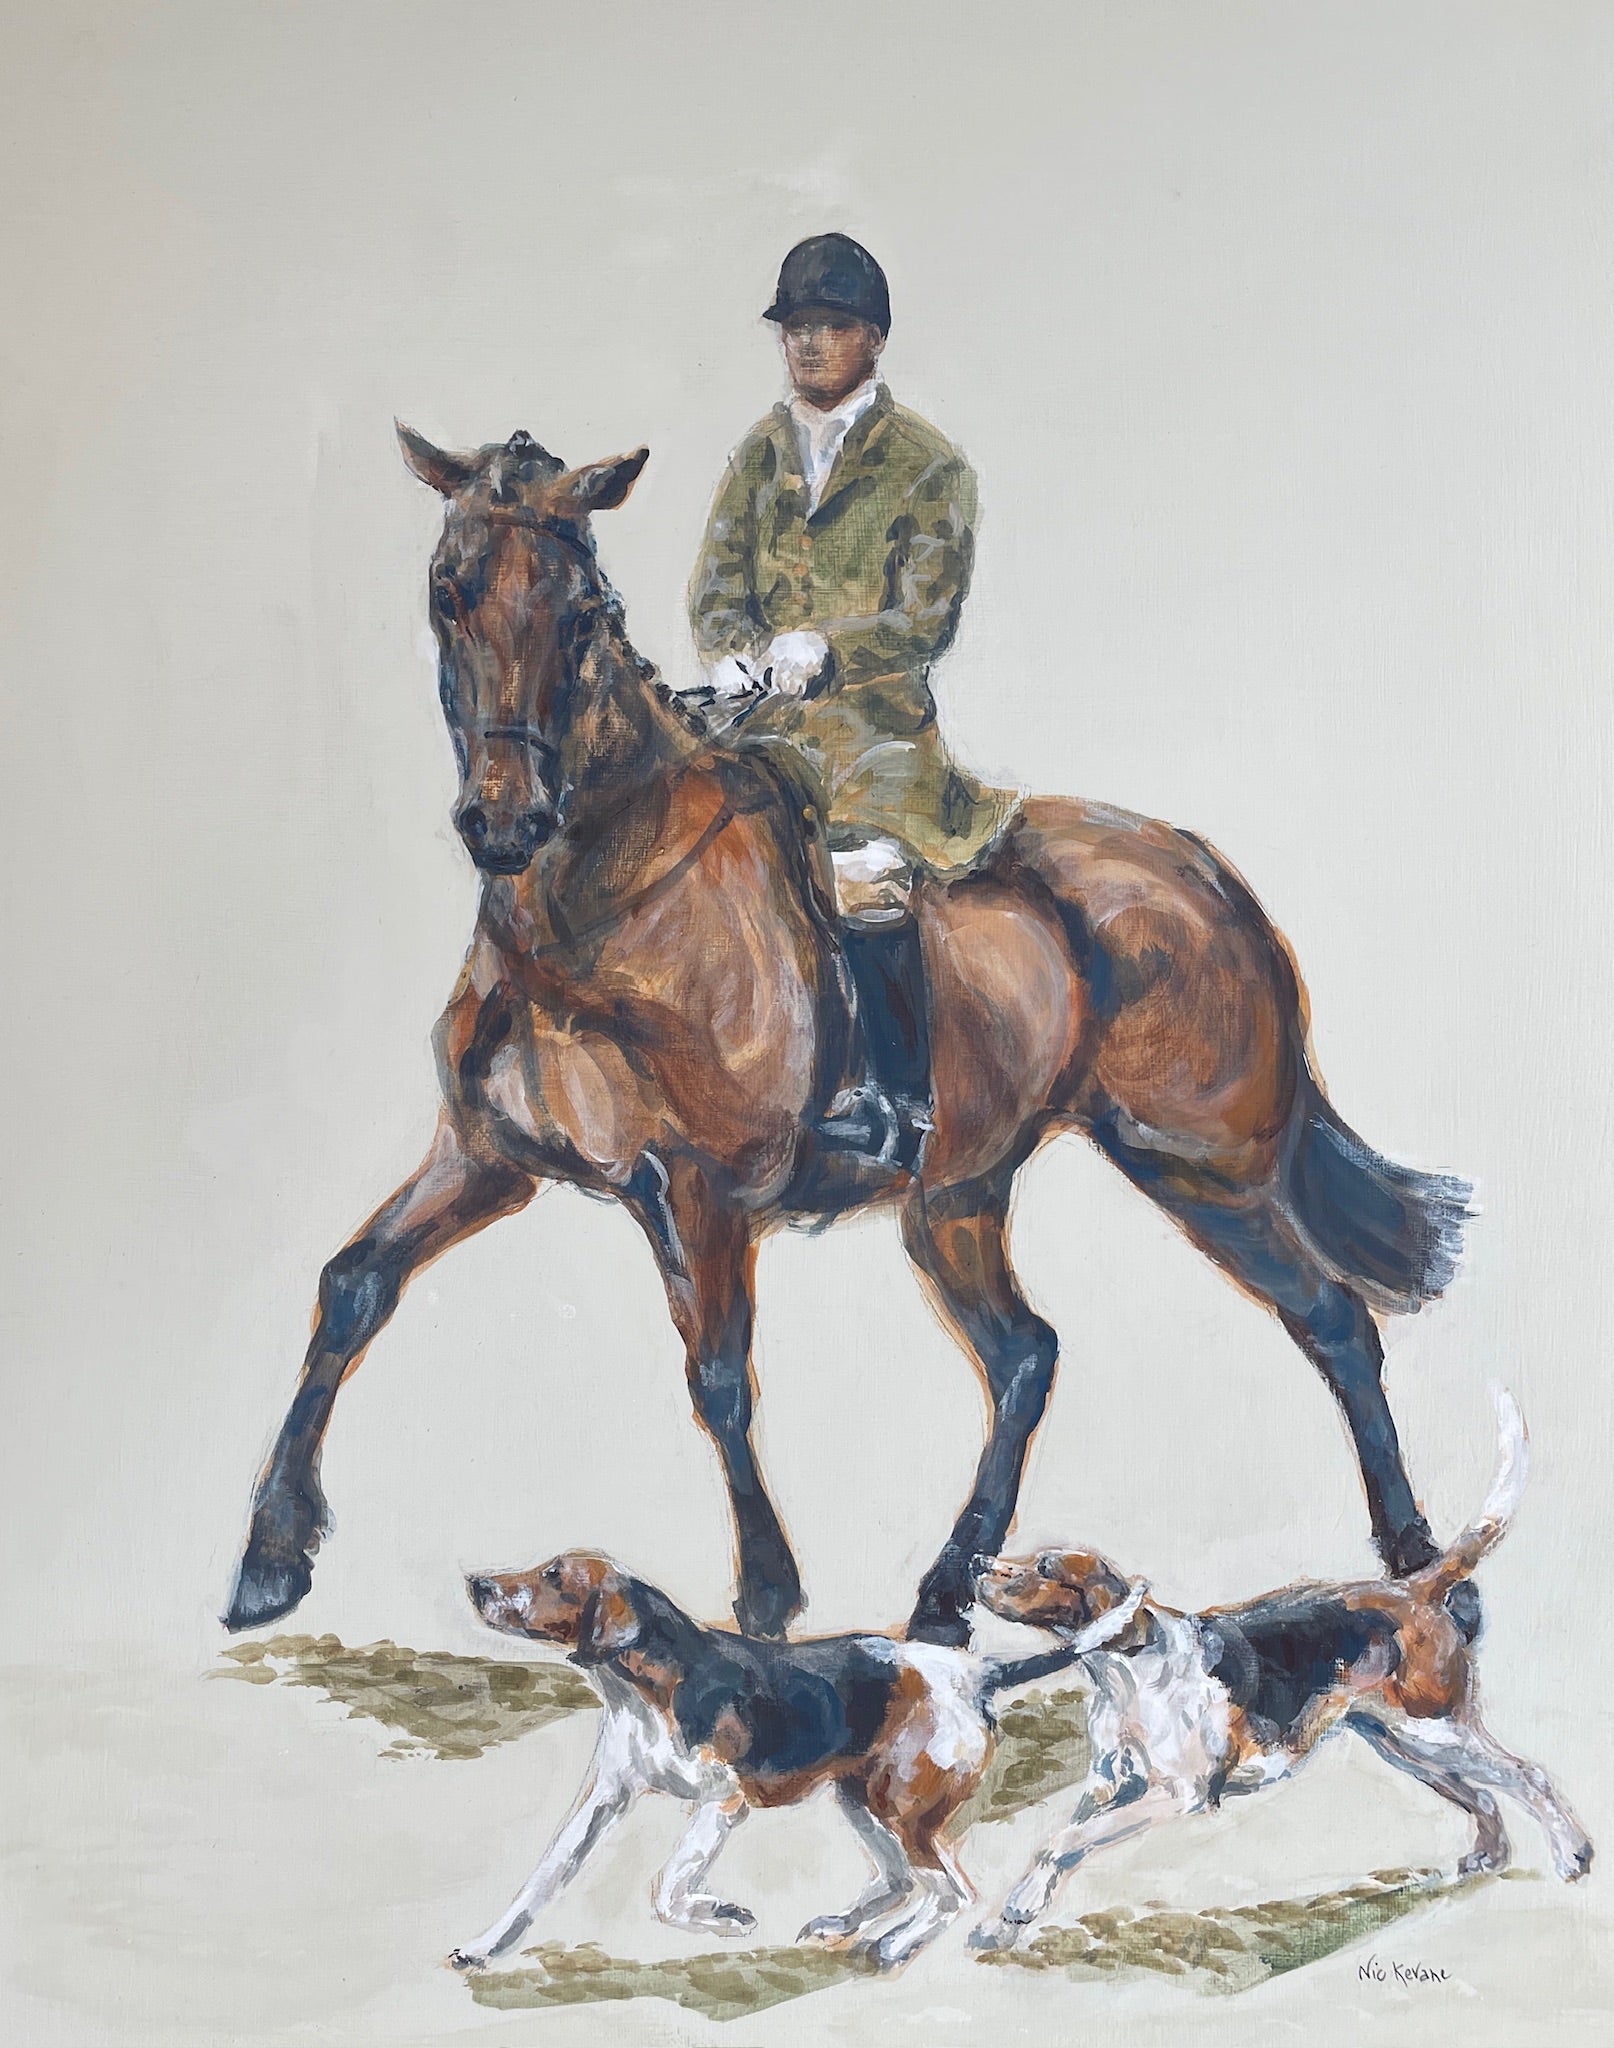 This painting captures a huntsman and hounds setting off from the hunt meet.  The horse is shying at the two hounds who have rushed up to his side in fear of being left behind.